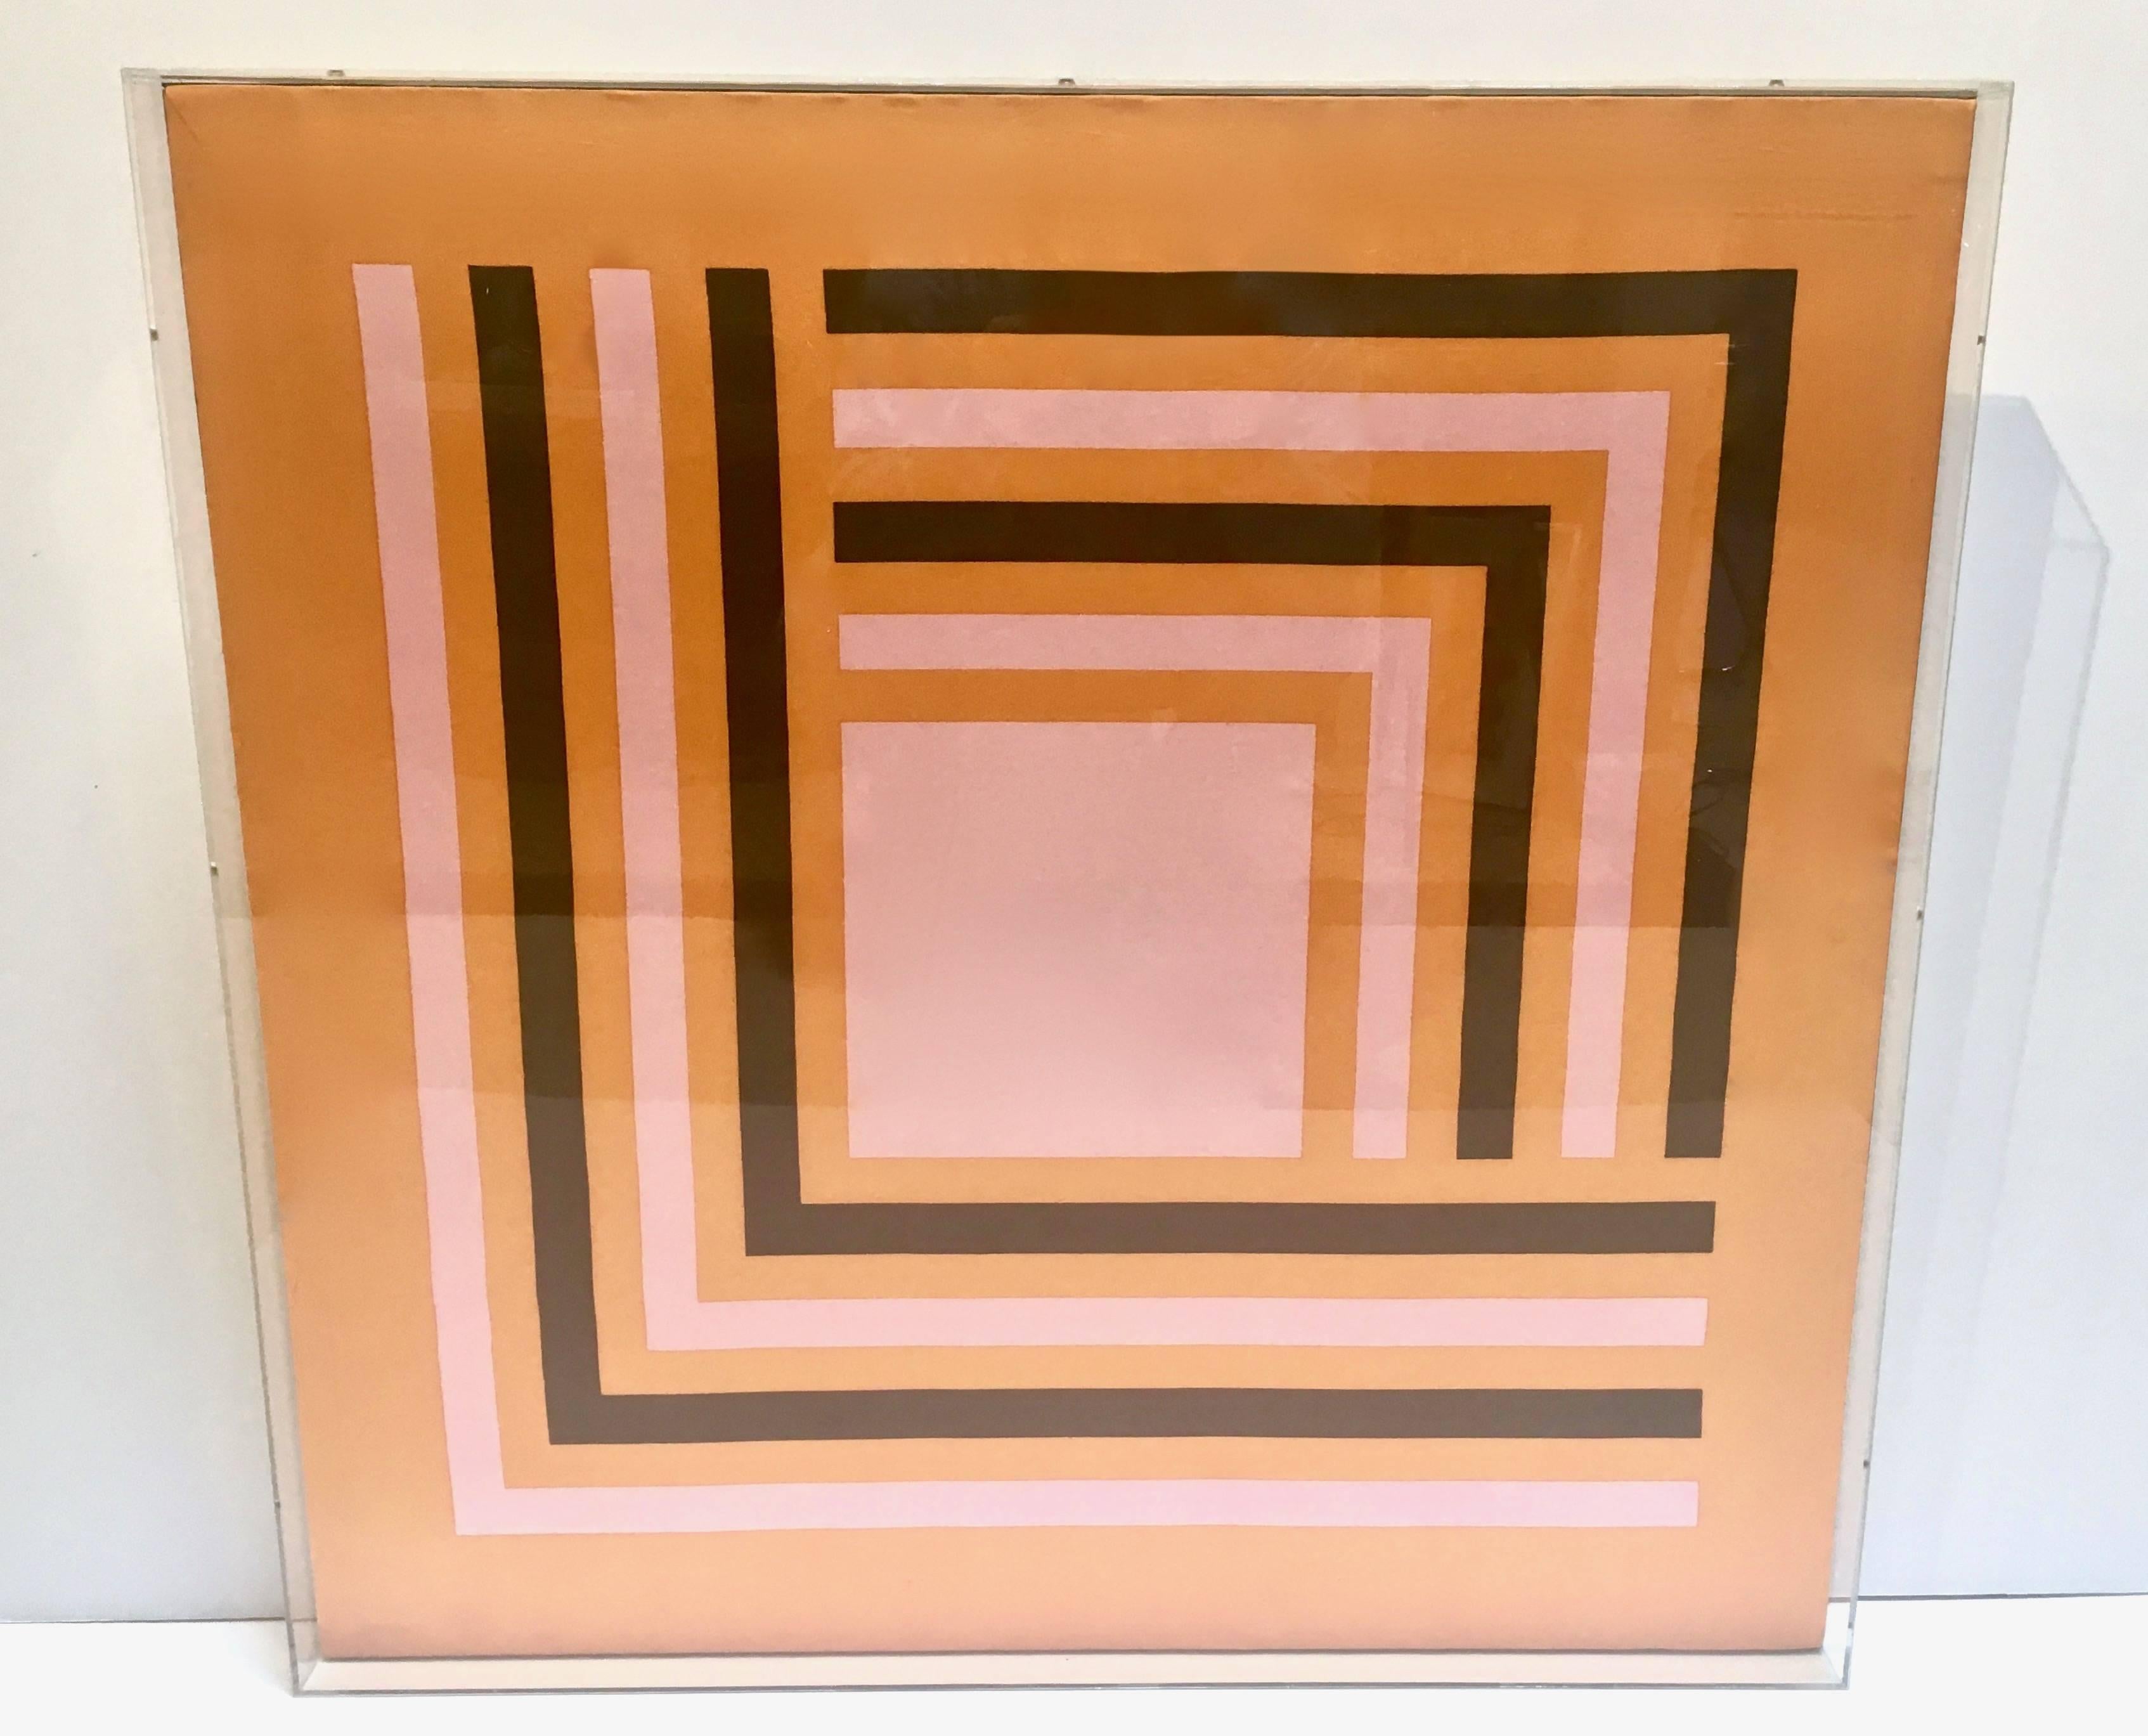 A great hard edge graphic abstract vintage silk scarf, circa 1970s. The scarfs design of interlocking lines and a square, reminiscent of Albers or Gene Davis, circa 1970s has vivid contrasting colors of orange, pink and deep chocolate brown. The